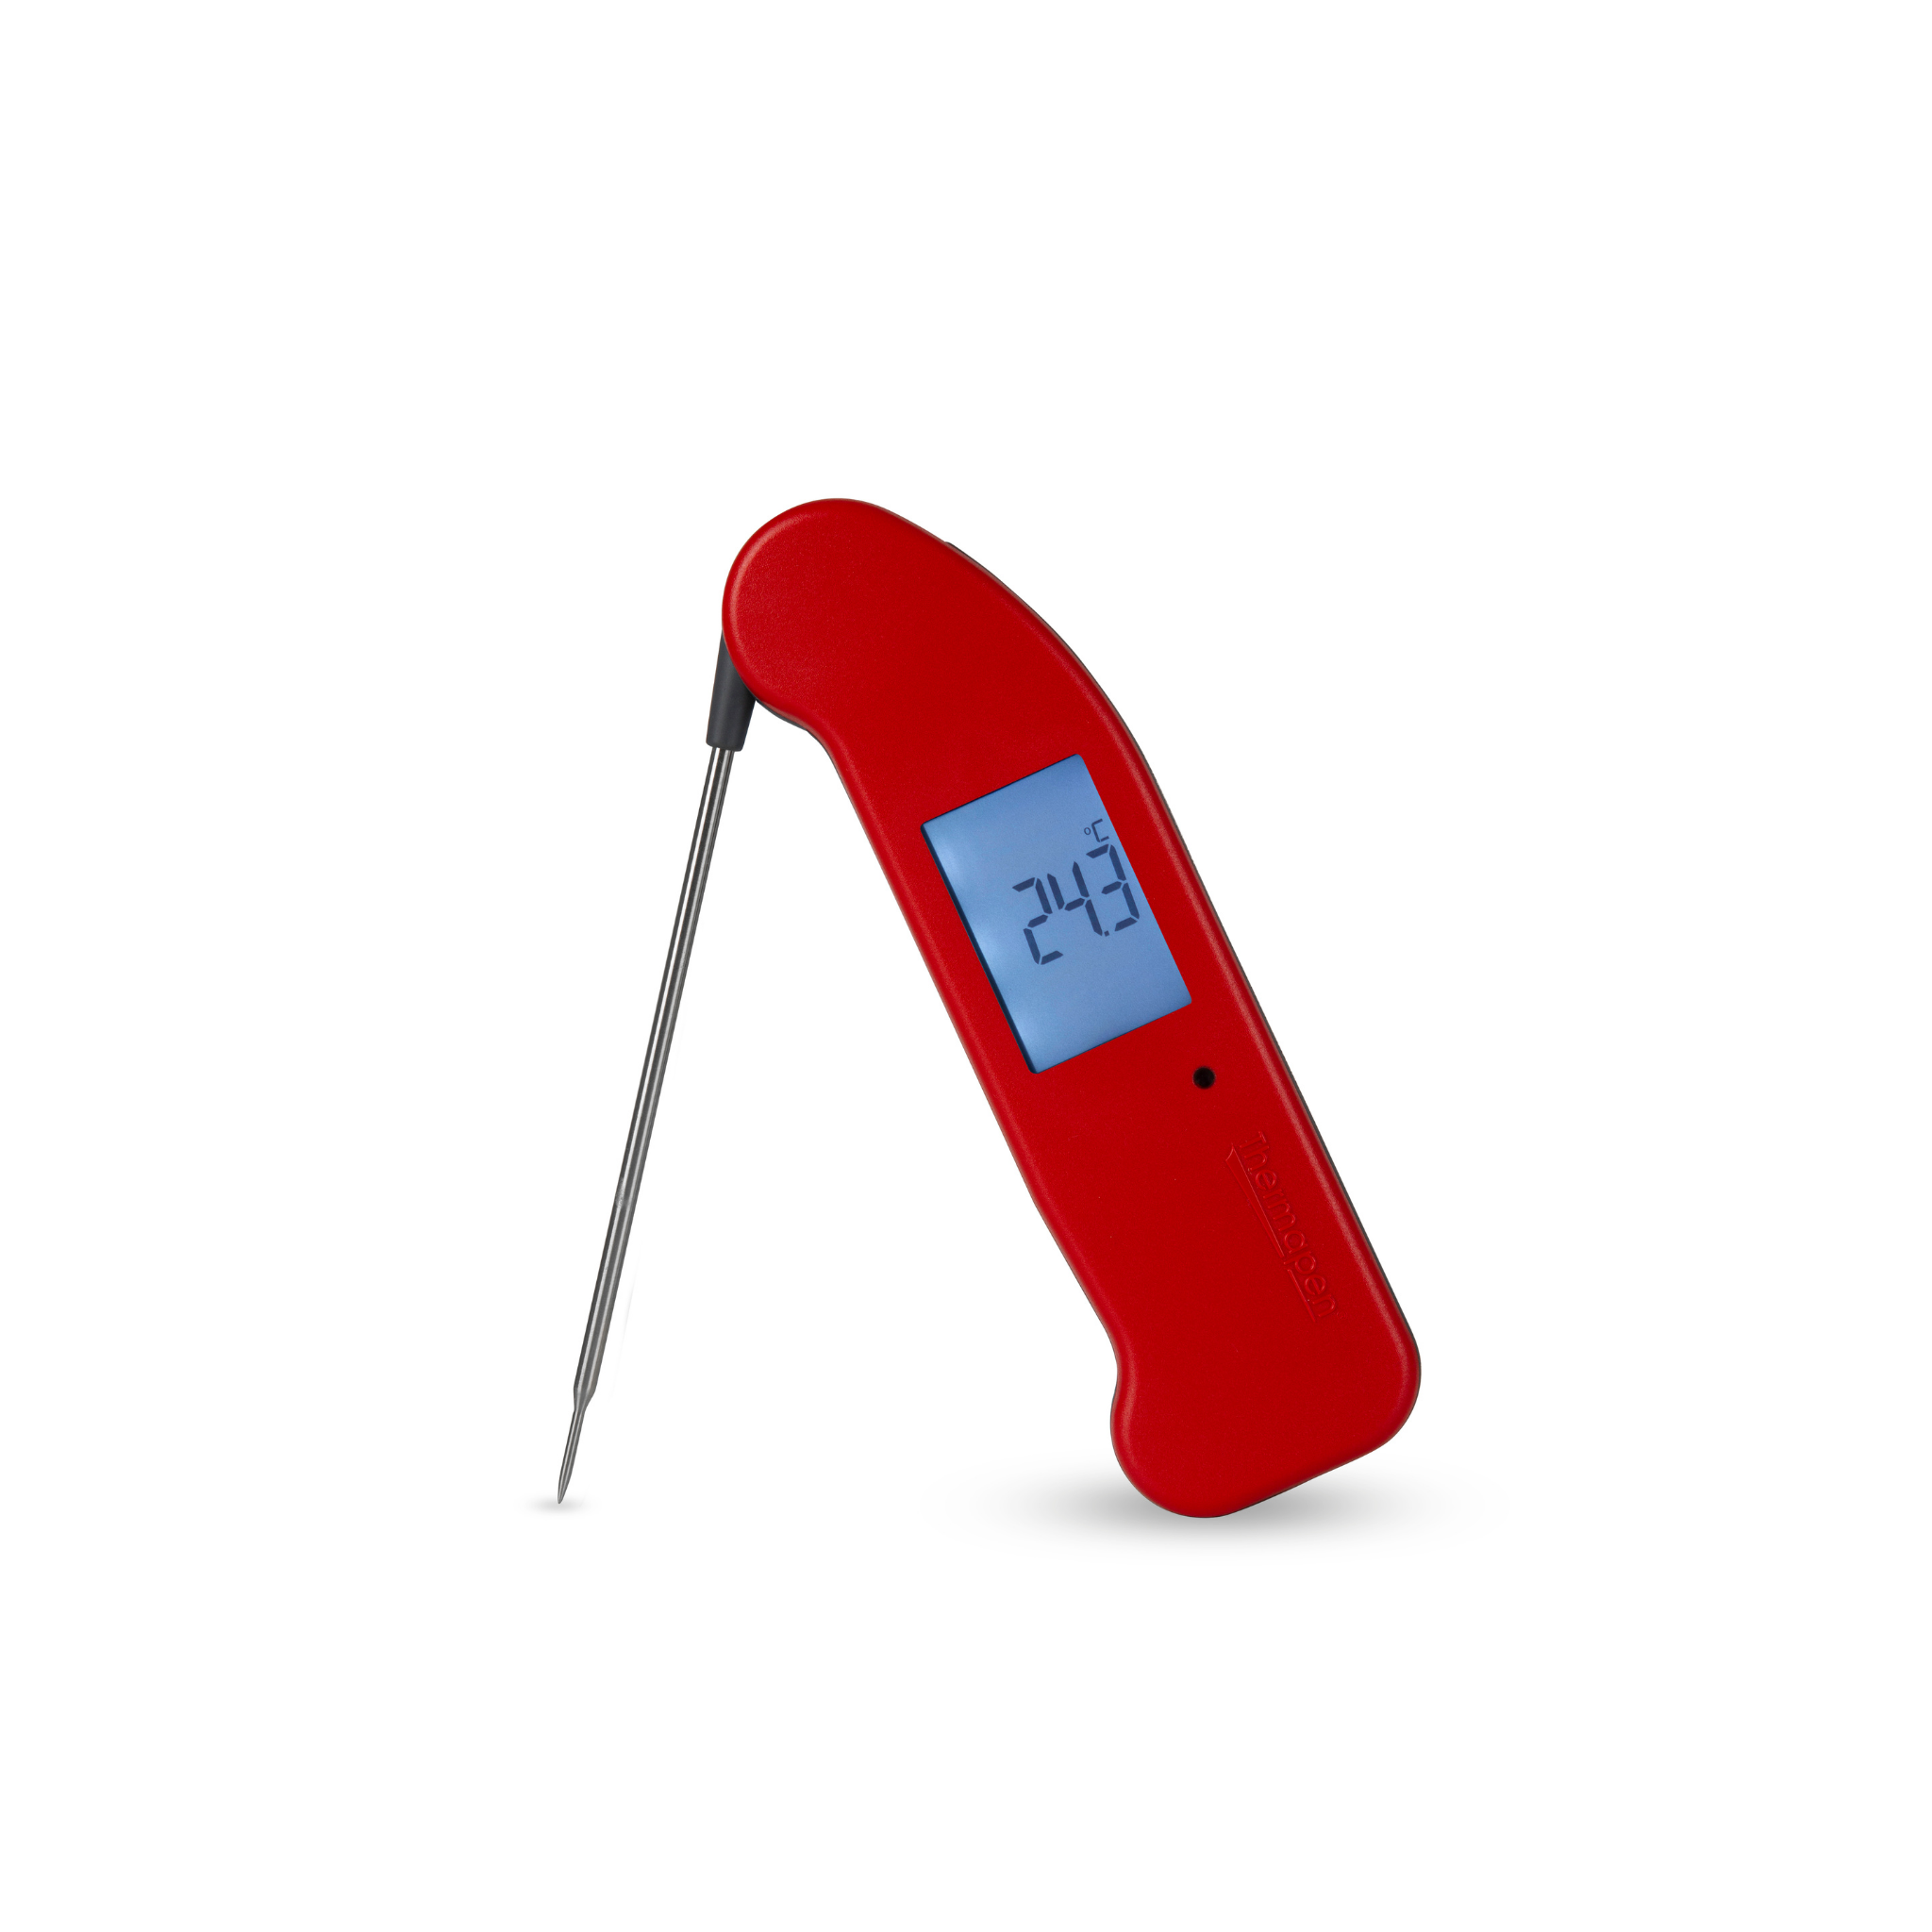 Superfast Thermapen One Thermometer - Digital Instant READ Meat Red